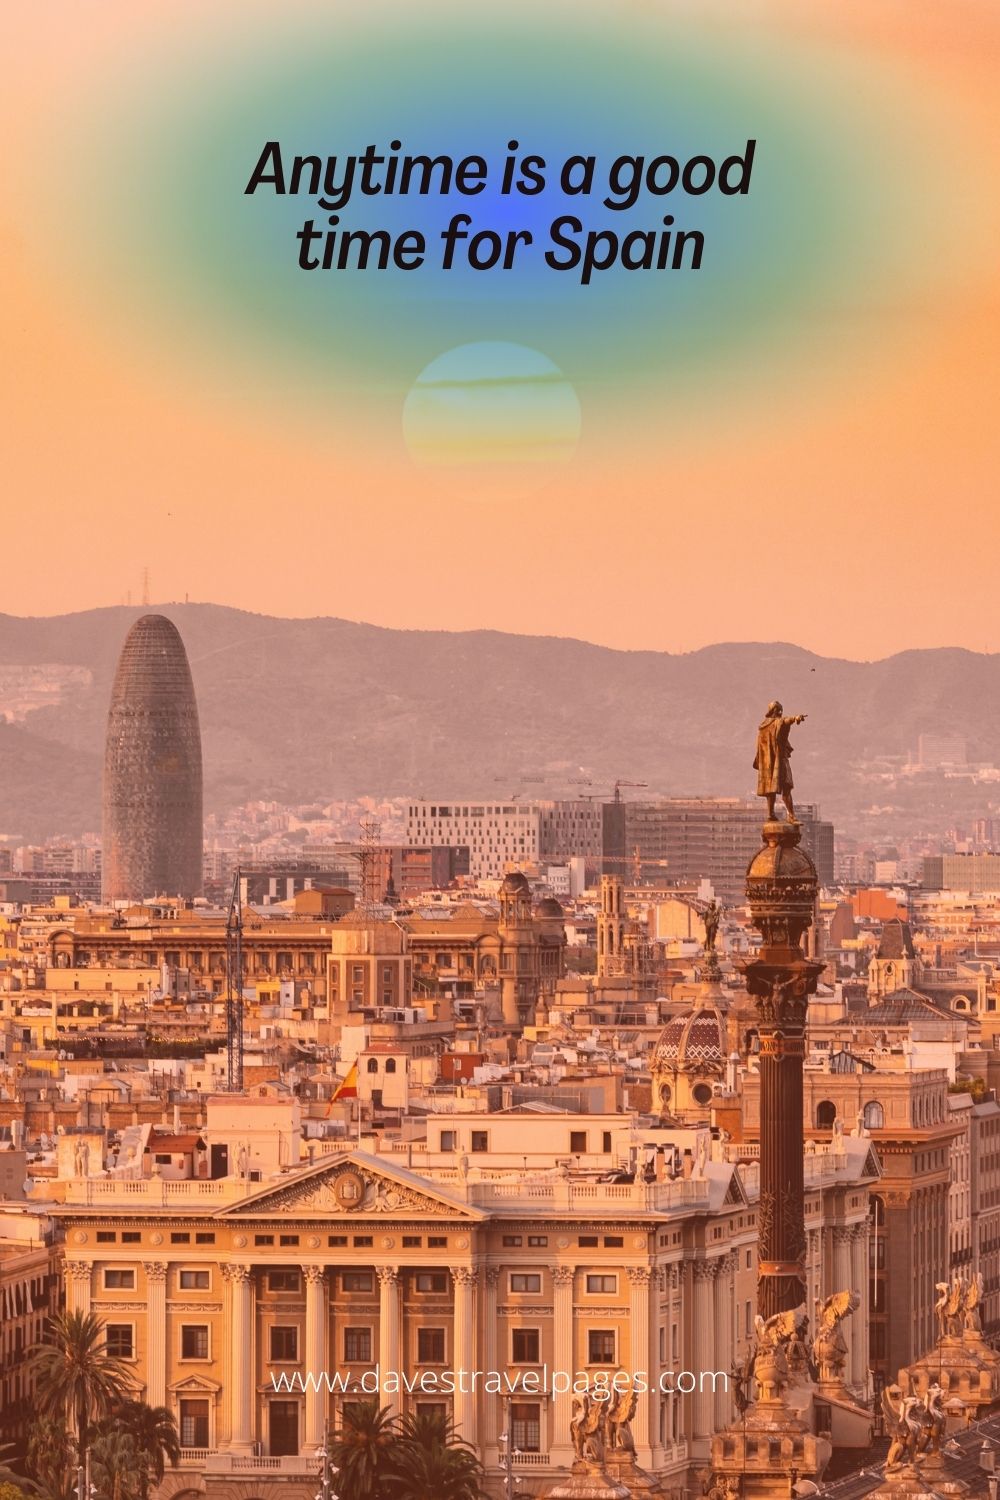 Anytime is a good time for Spain